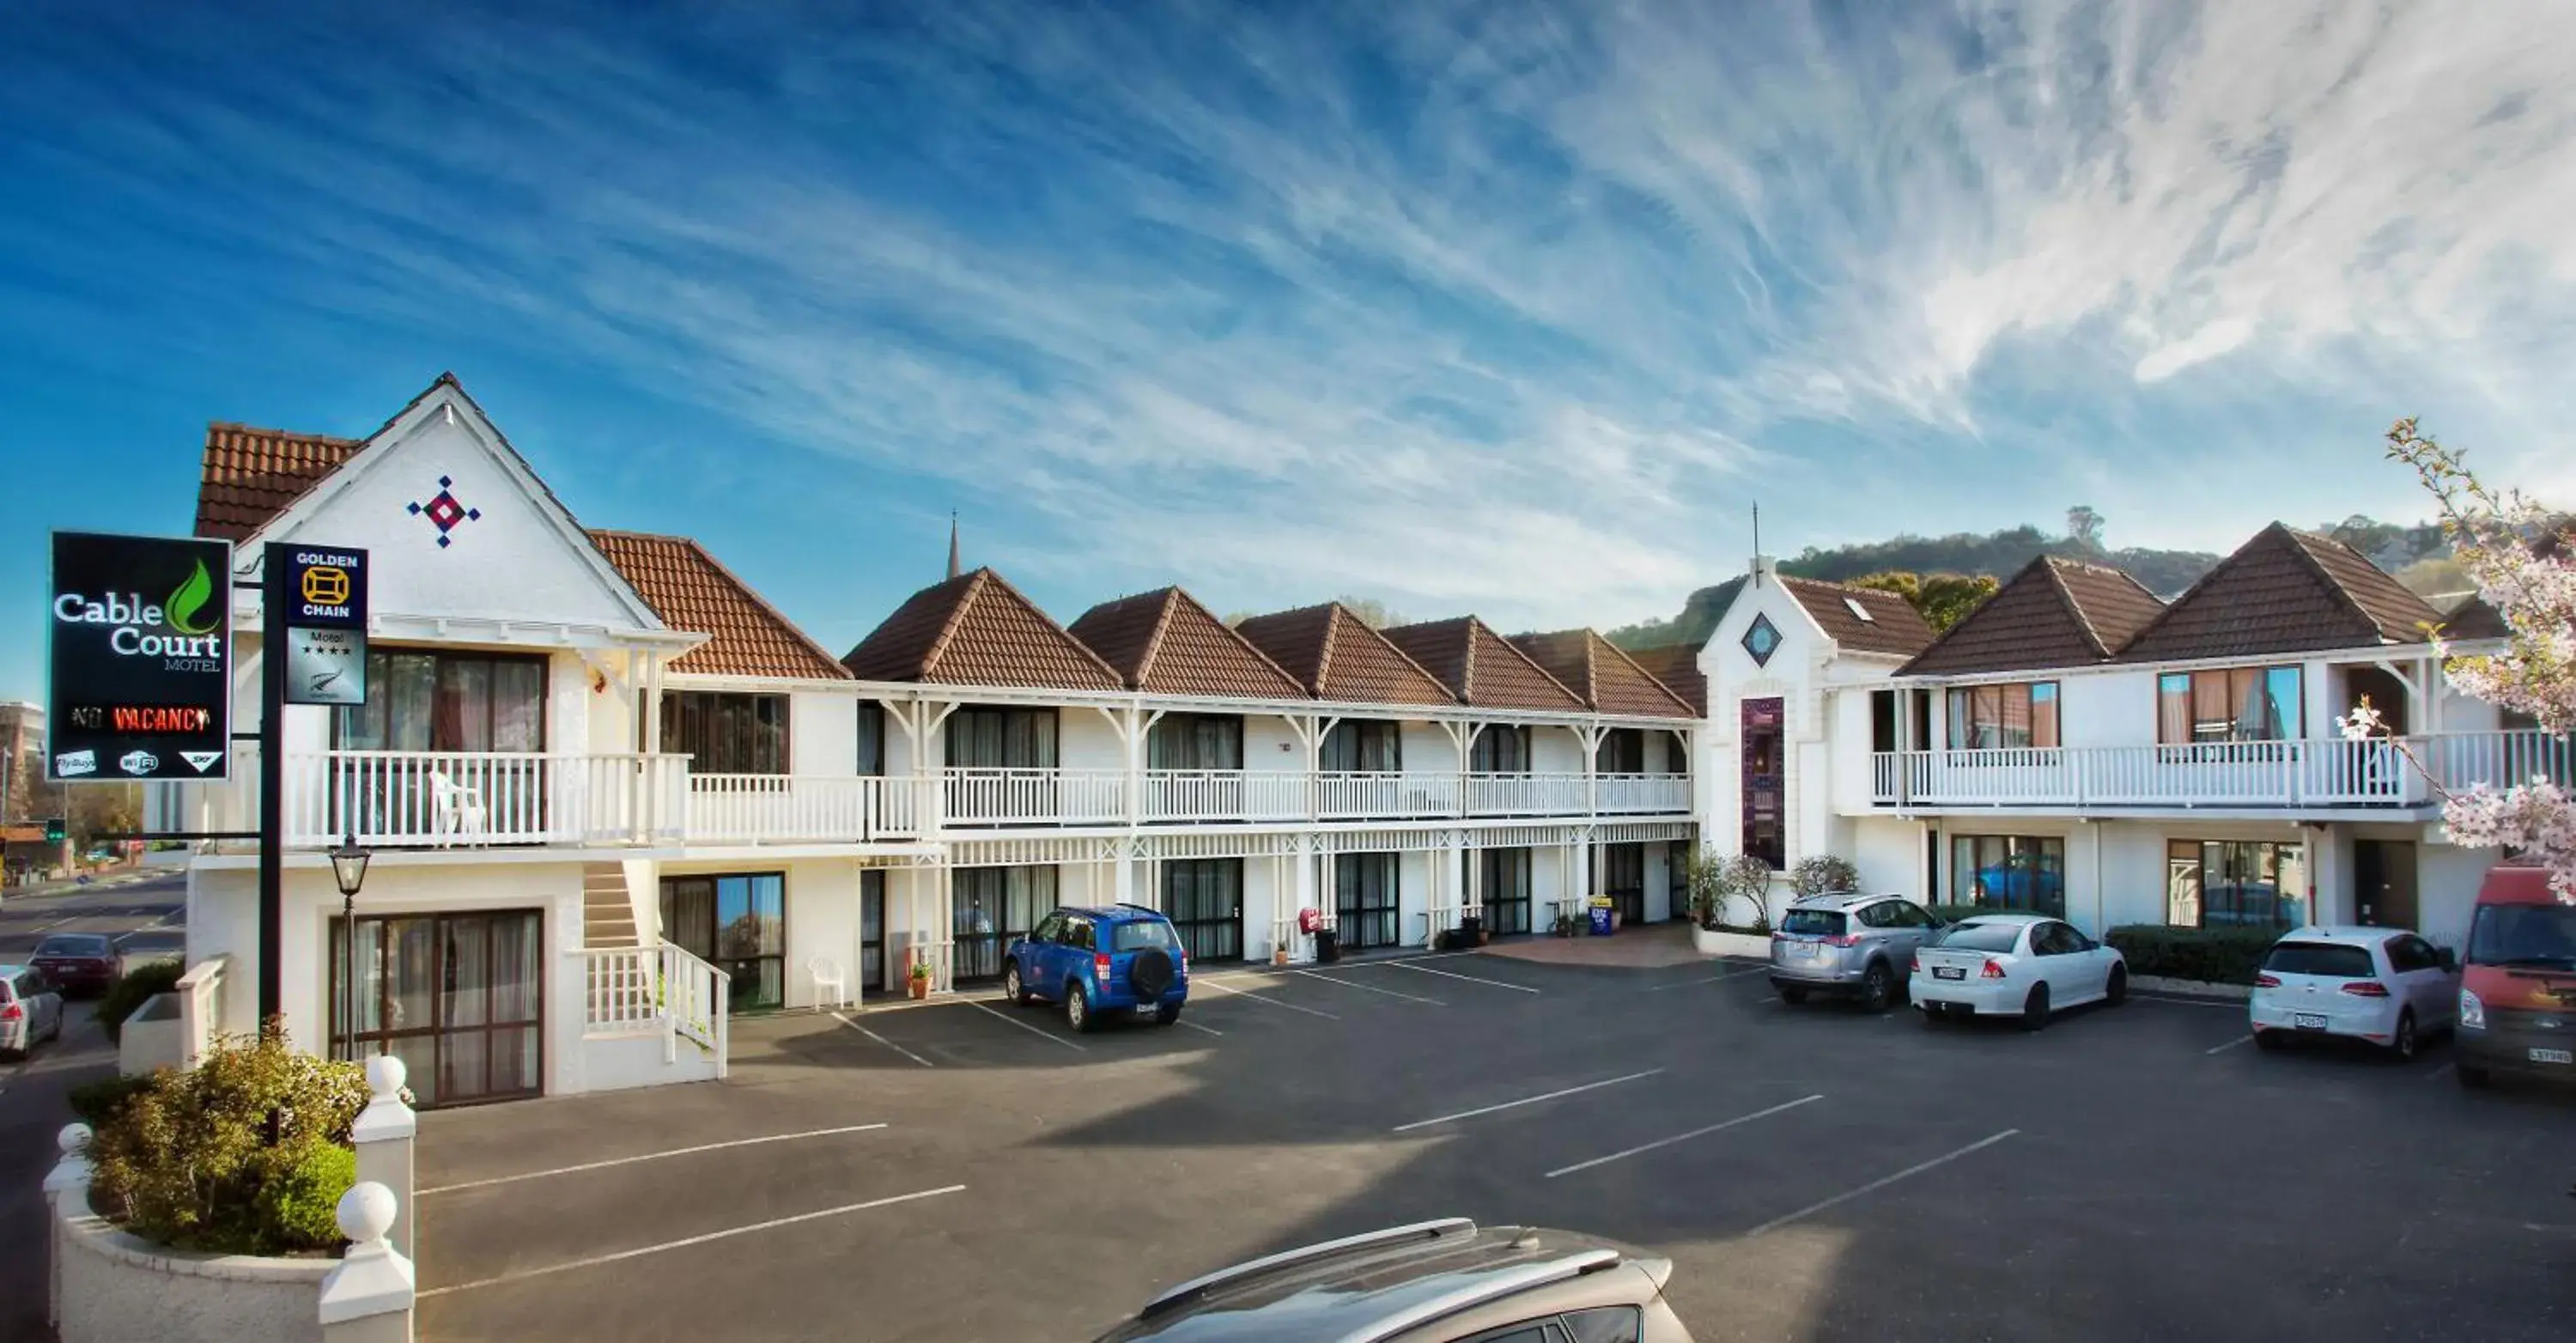 Bird's eye view, Property Building in Cable Court Motel